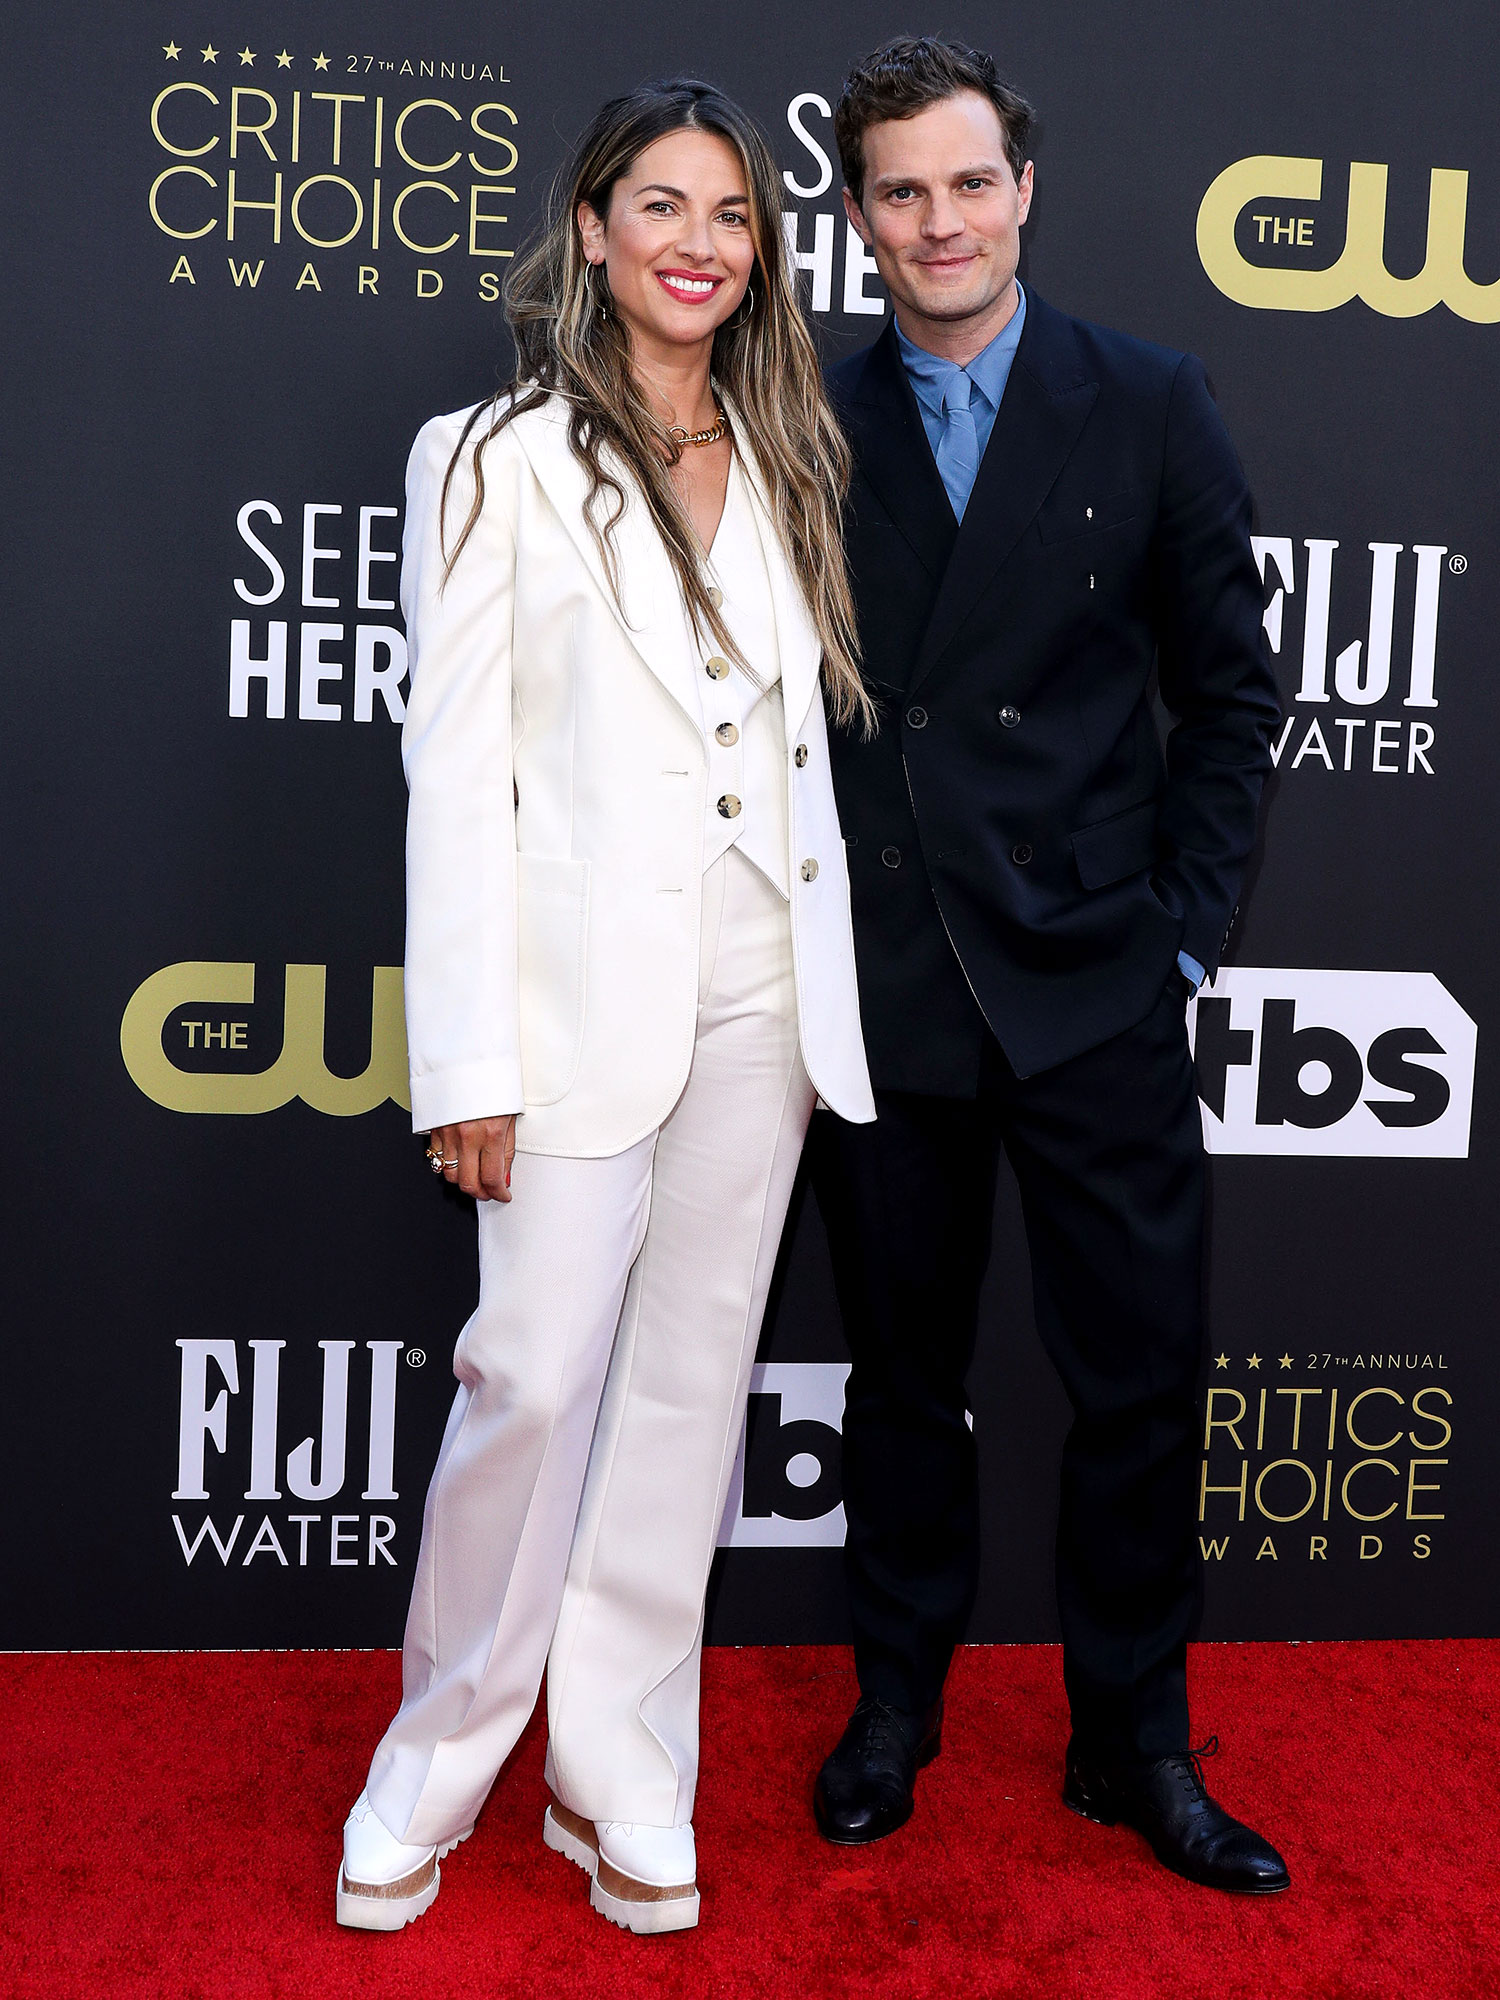 Jamie Dornan and Amelia Warner Hottest Couples on the Critics Choice Awards 2022 Red Carpet